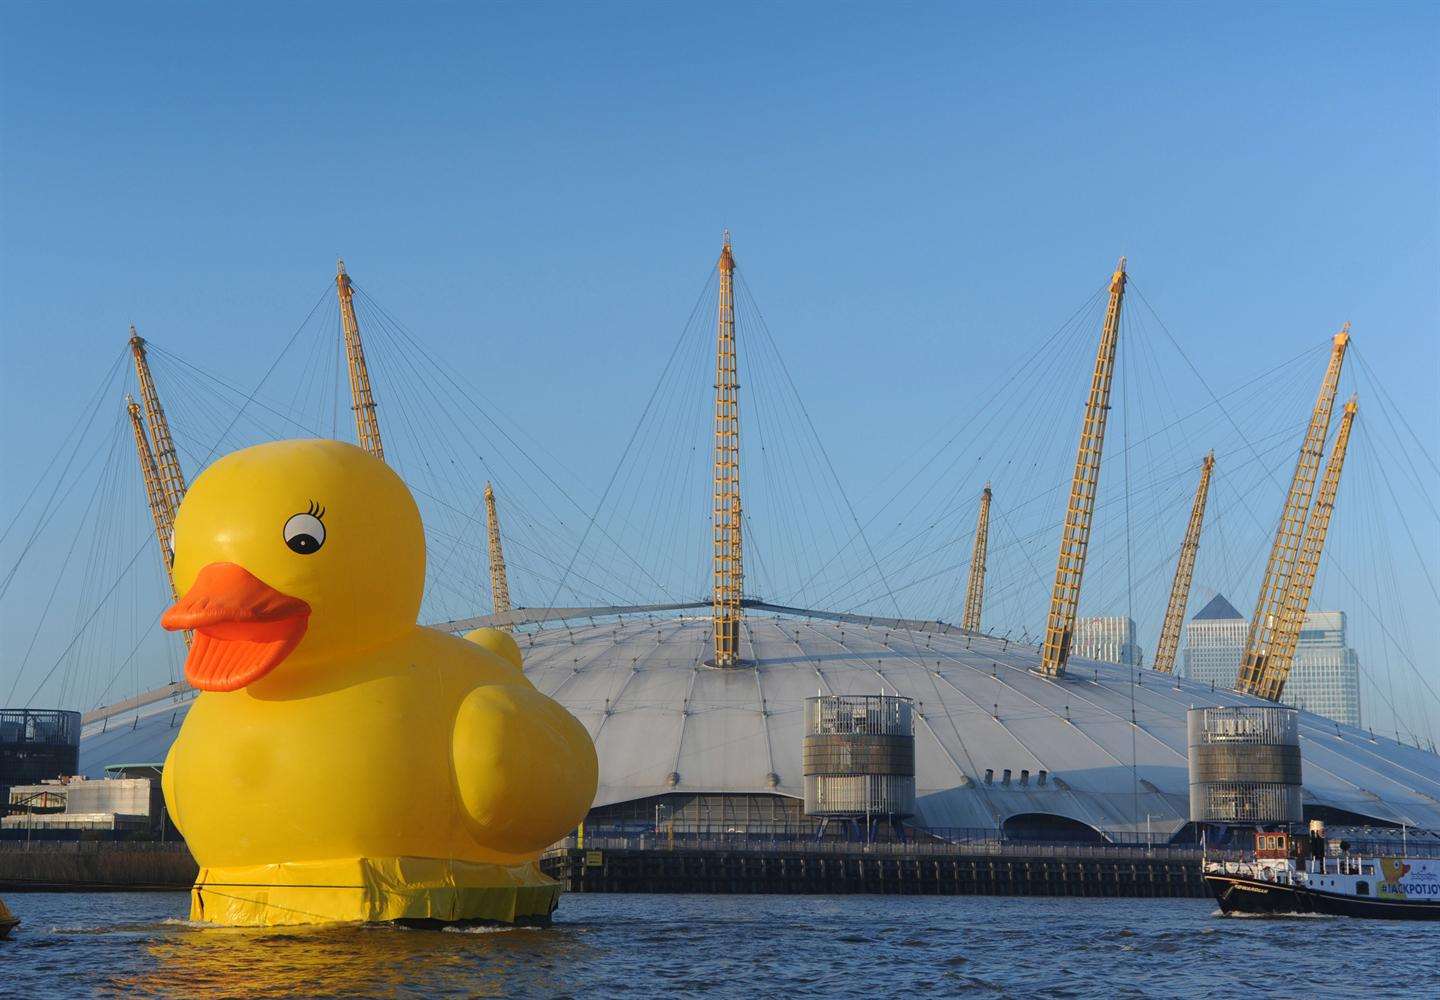 Many remember a giant rubber duck floating down the Thames in December 2012 but not many people realise it was part of a marketing campaign for online gambling brand Jackpotjoy.com